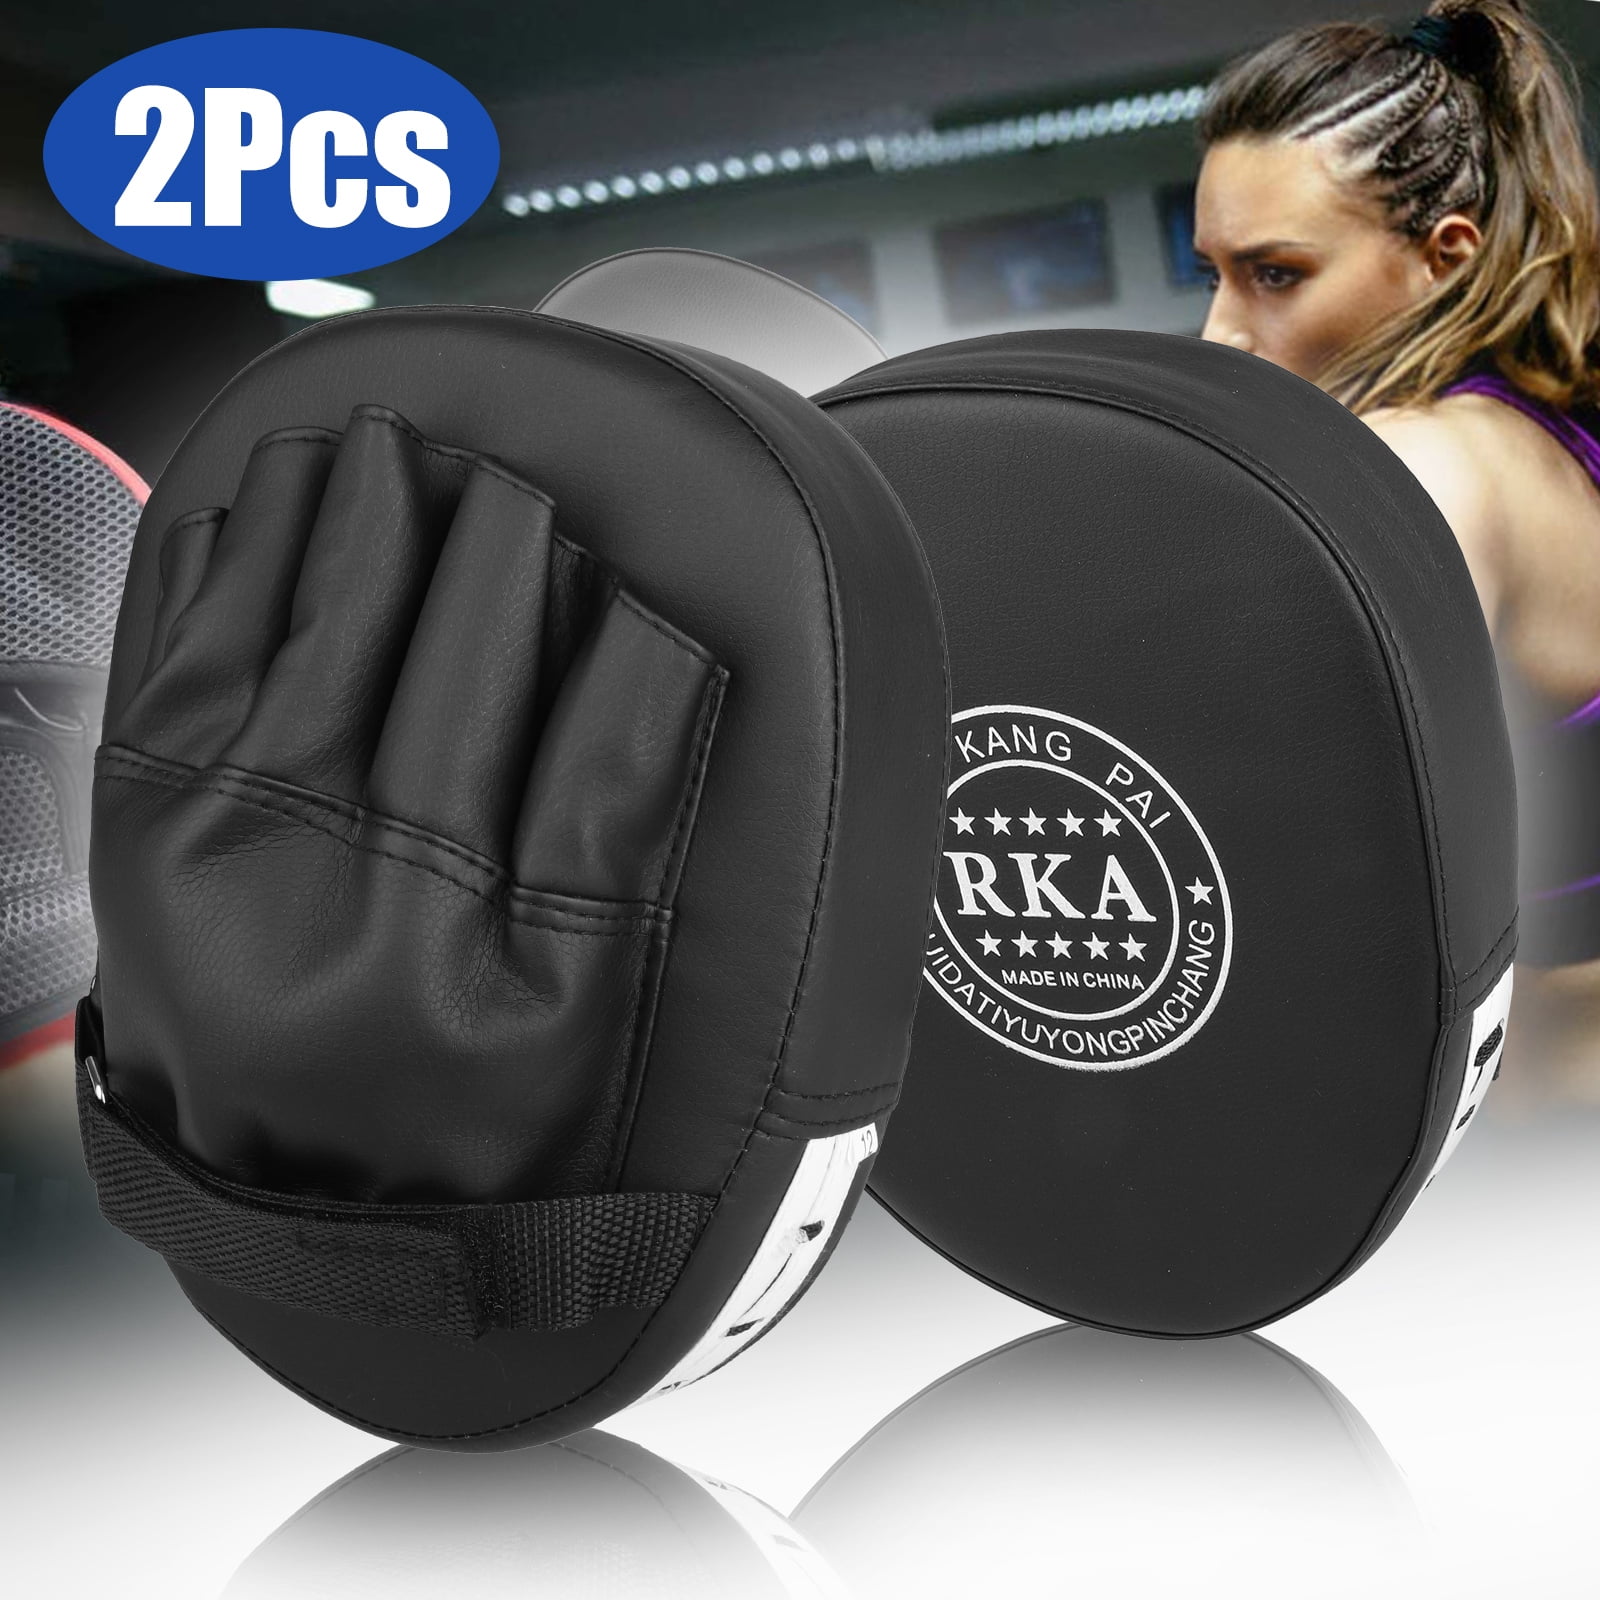 Kids Punching Hand Wraps Boxing Gloves Pad MMA Muay Thai Karate Sparring Mittens 